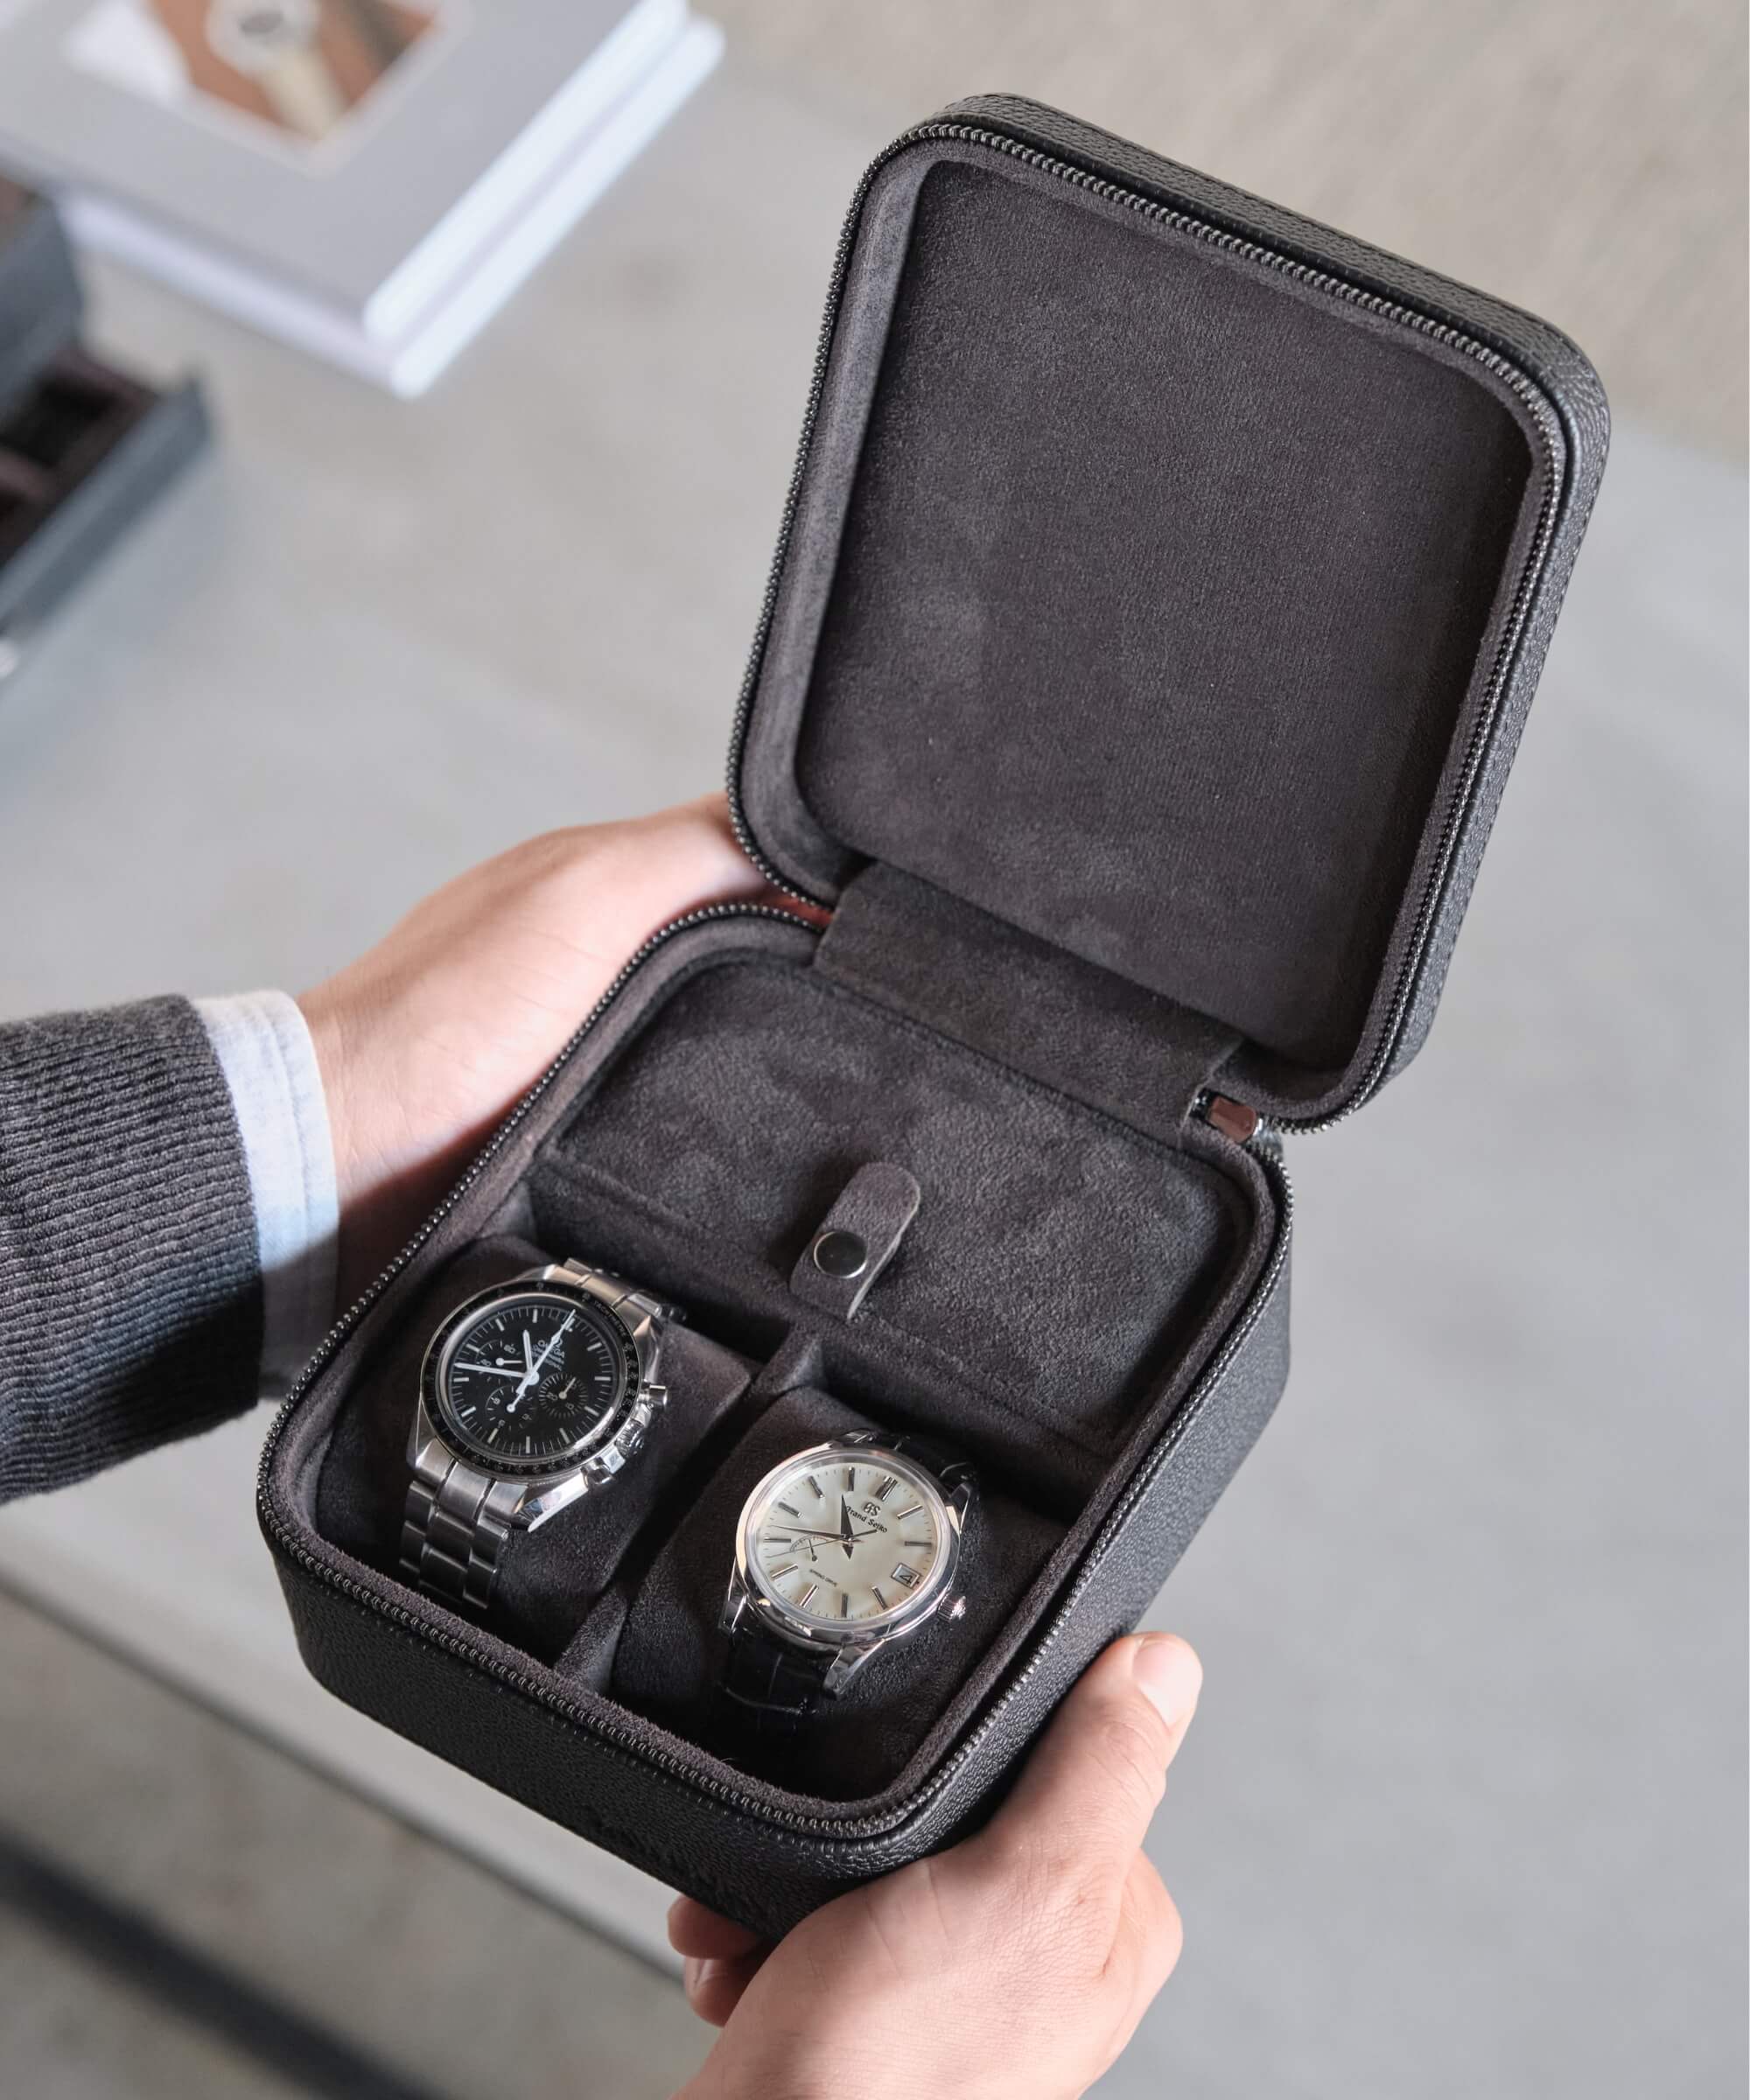 A TAWBURY watch lover showcasing three Fraser 2 Watch Travel Cases with Storage - Black in a leather travel case.